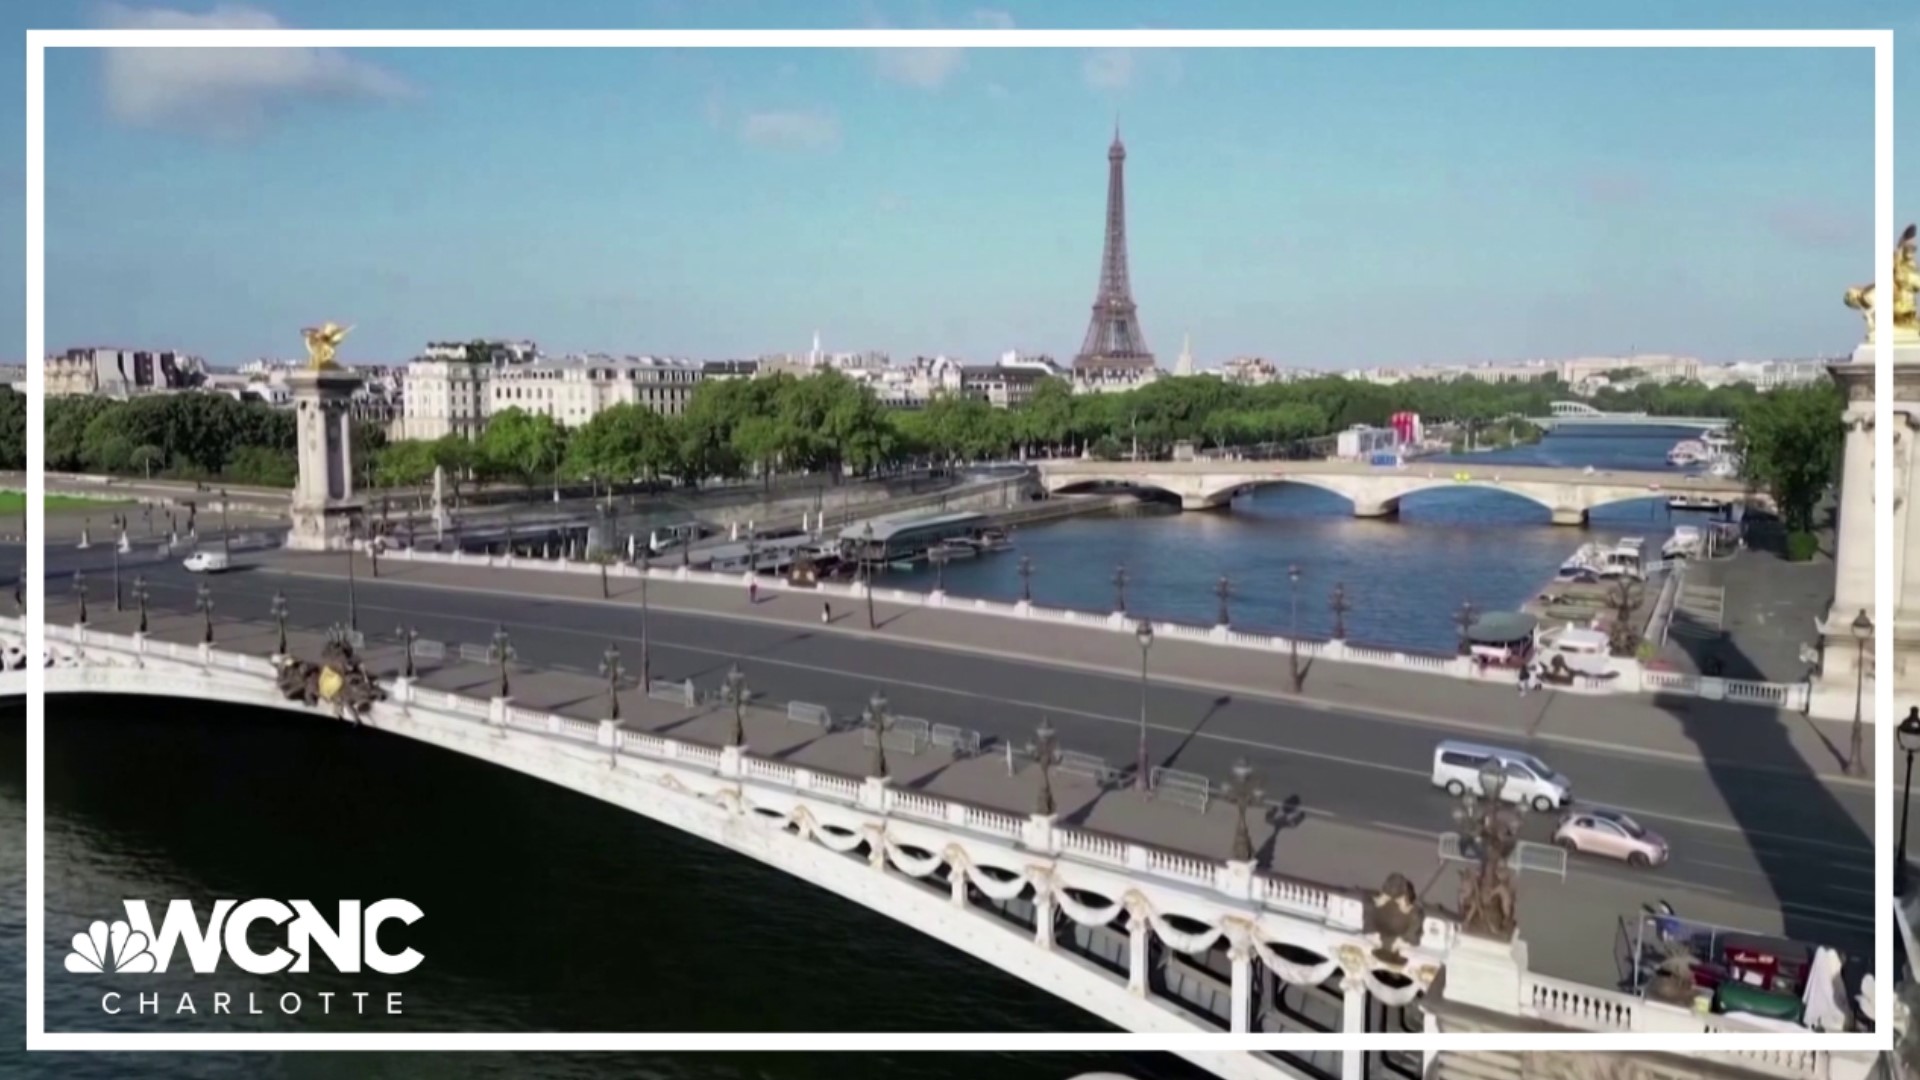 The opening ceremony will be along the River Seine.